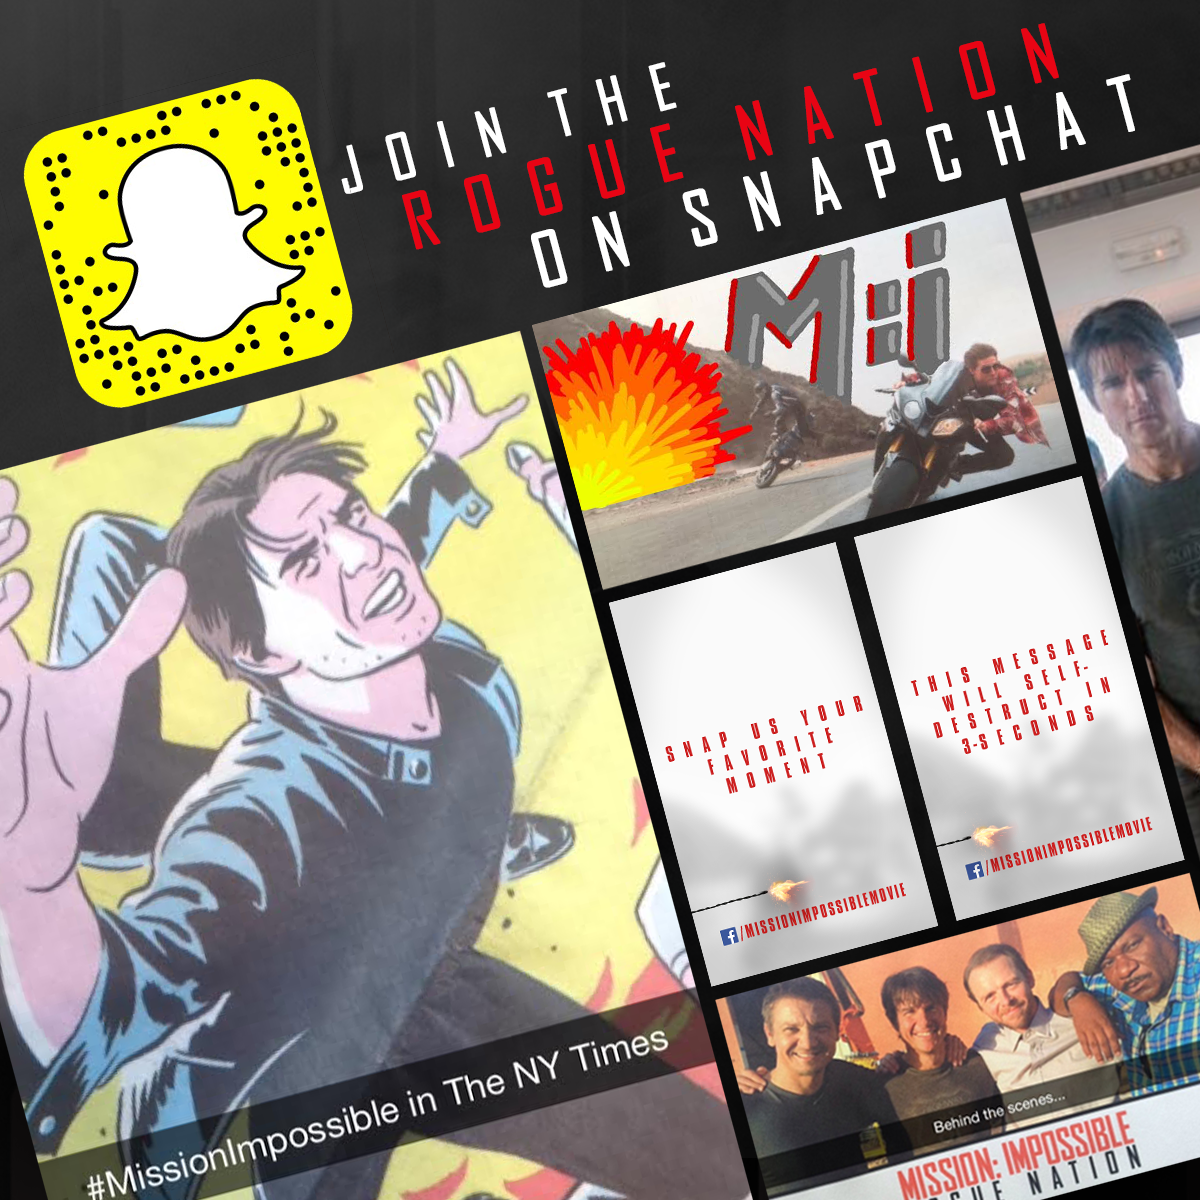 RT @MissionFilm: Follow MissionMovie on Snapchat NOW for a special message from Tom Cruise! RT http://t.co/tWIzy9wrpJ